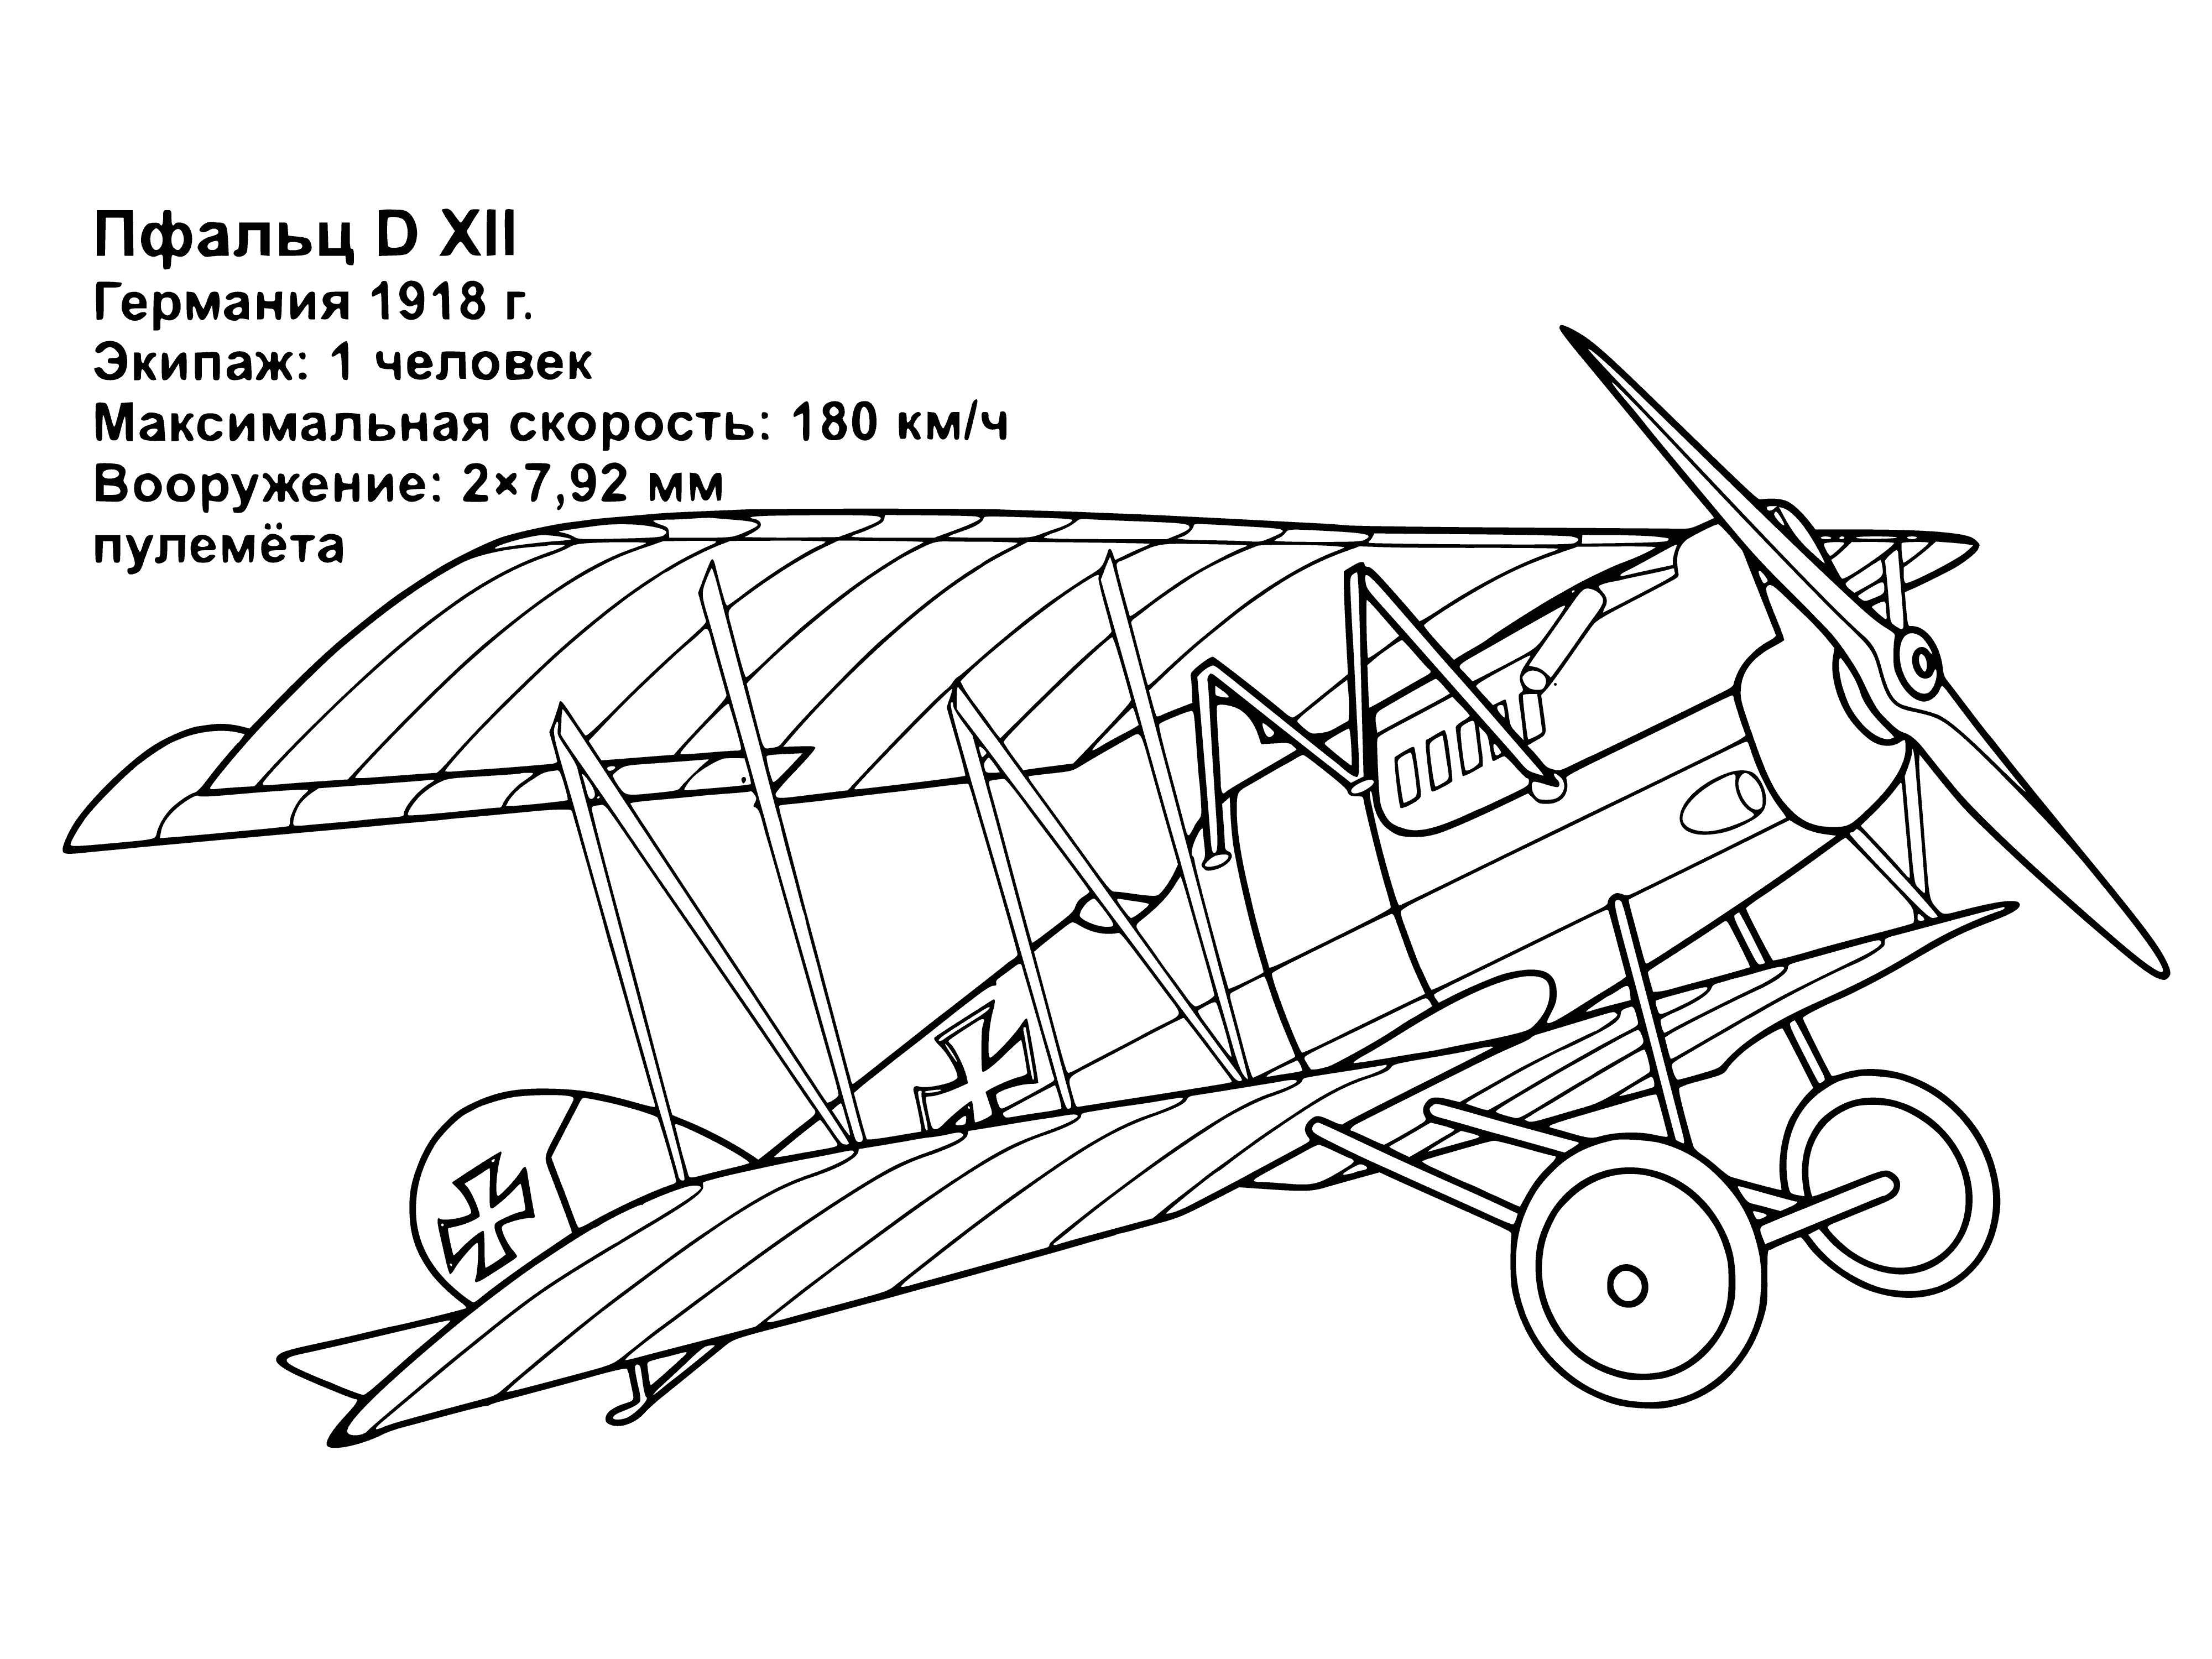 German aircraft of 1918 coloring page